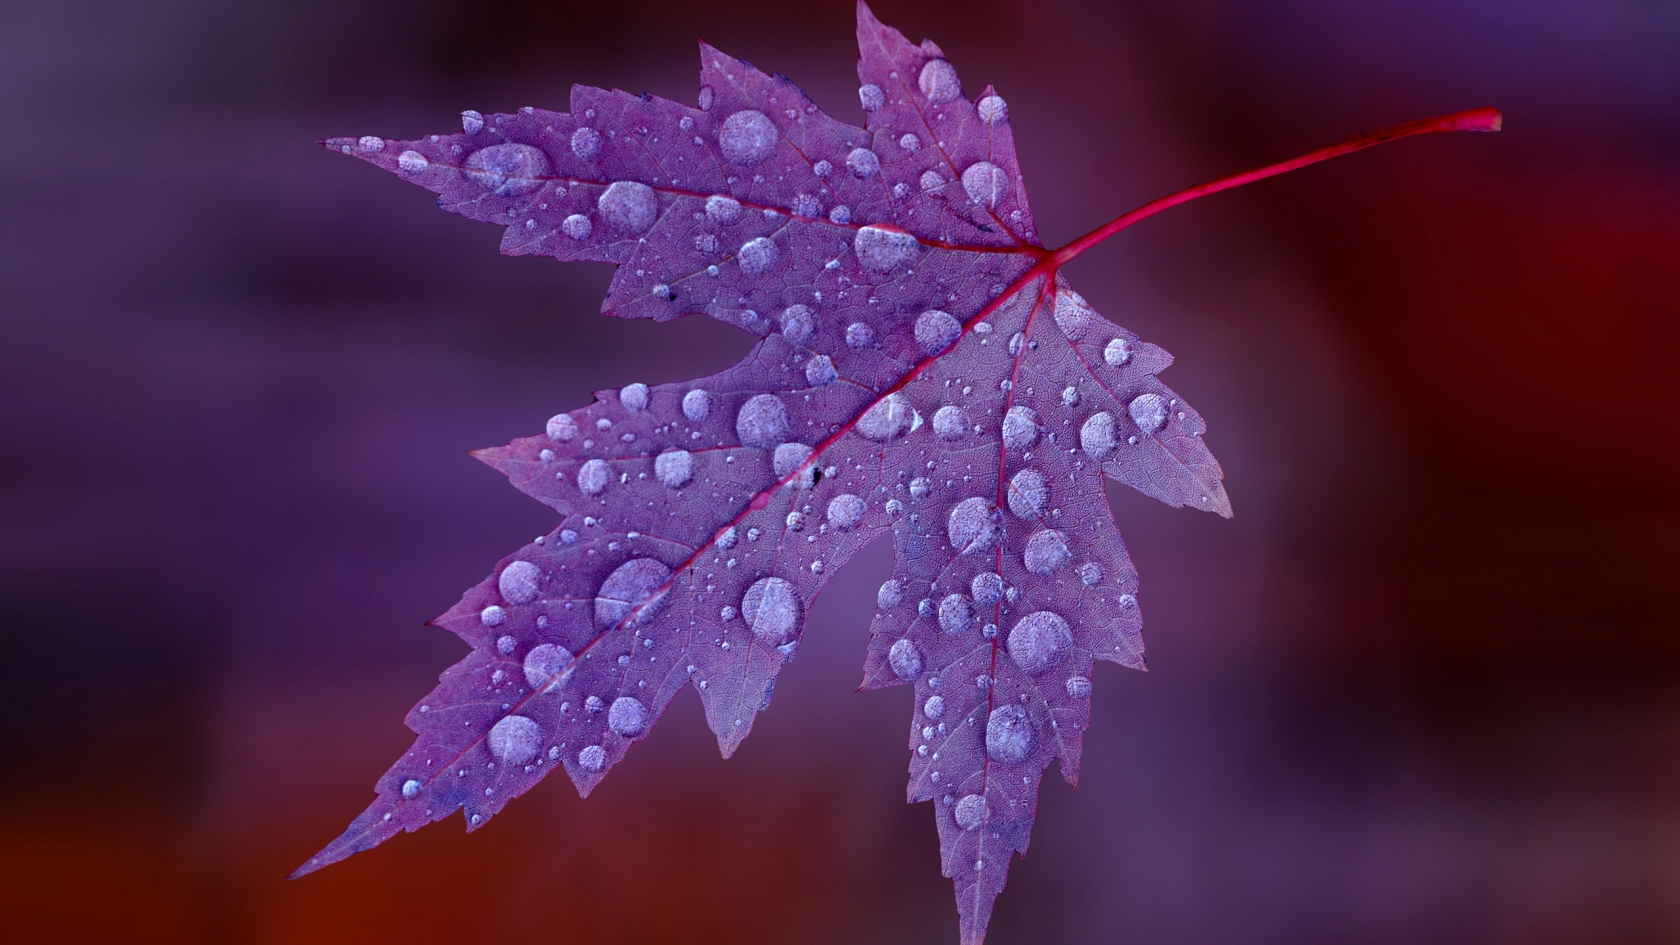 Water Drops on Purple Leaf  for 1680 x 945 HDTV resolution